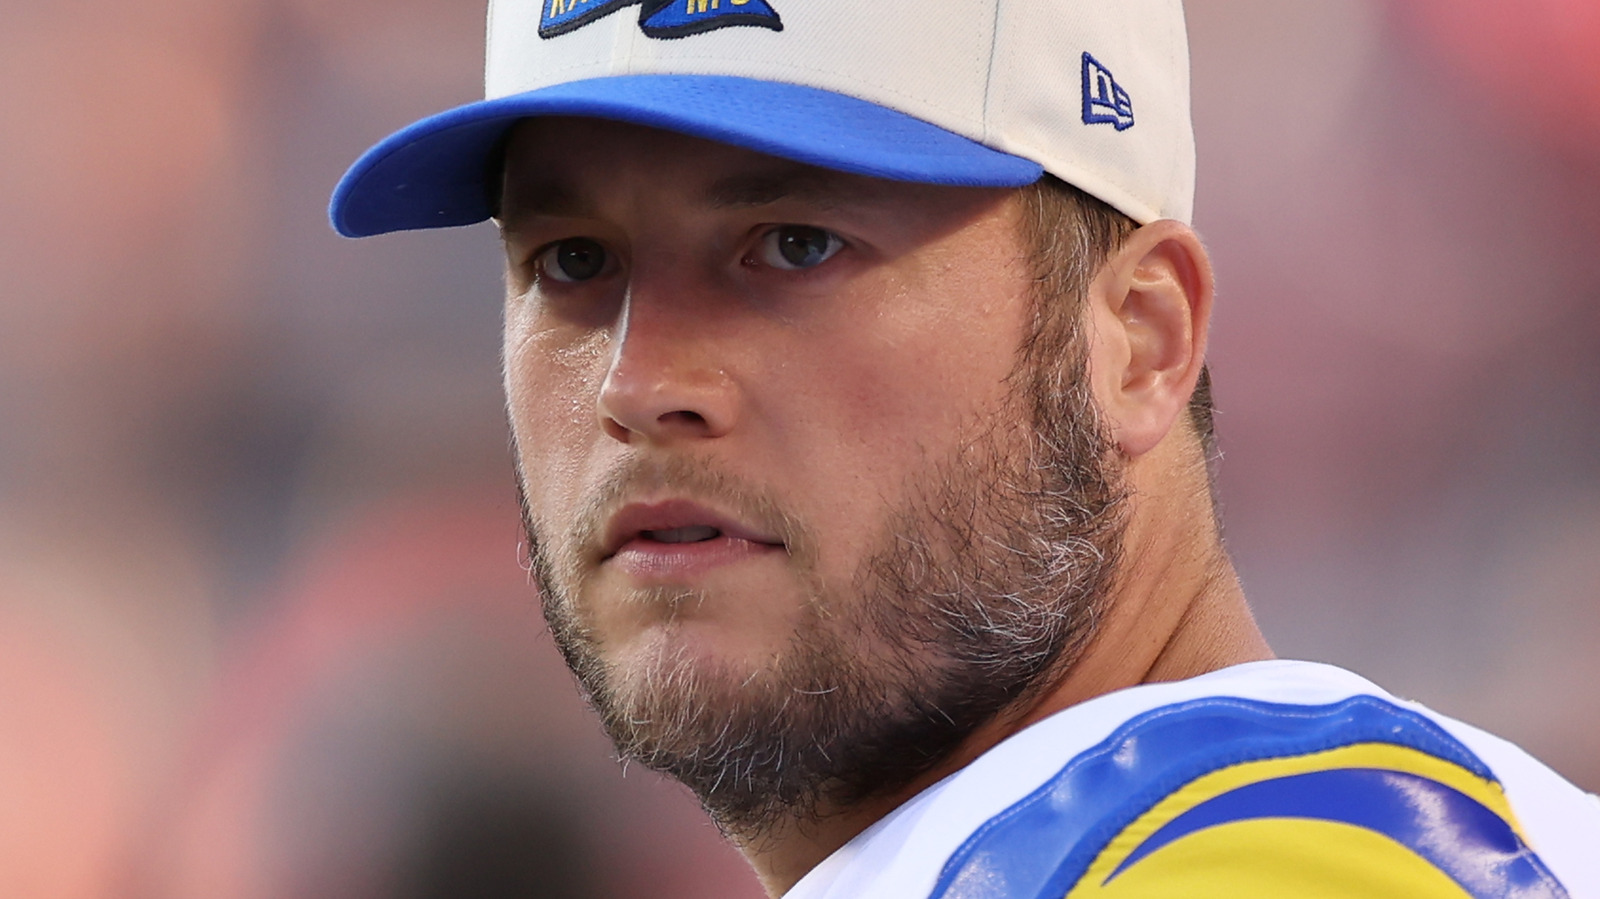 Matthew Stafford's Wife Kelly Hall: Job, How They Met, More